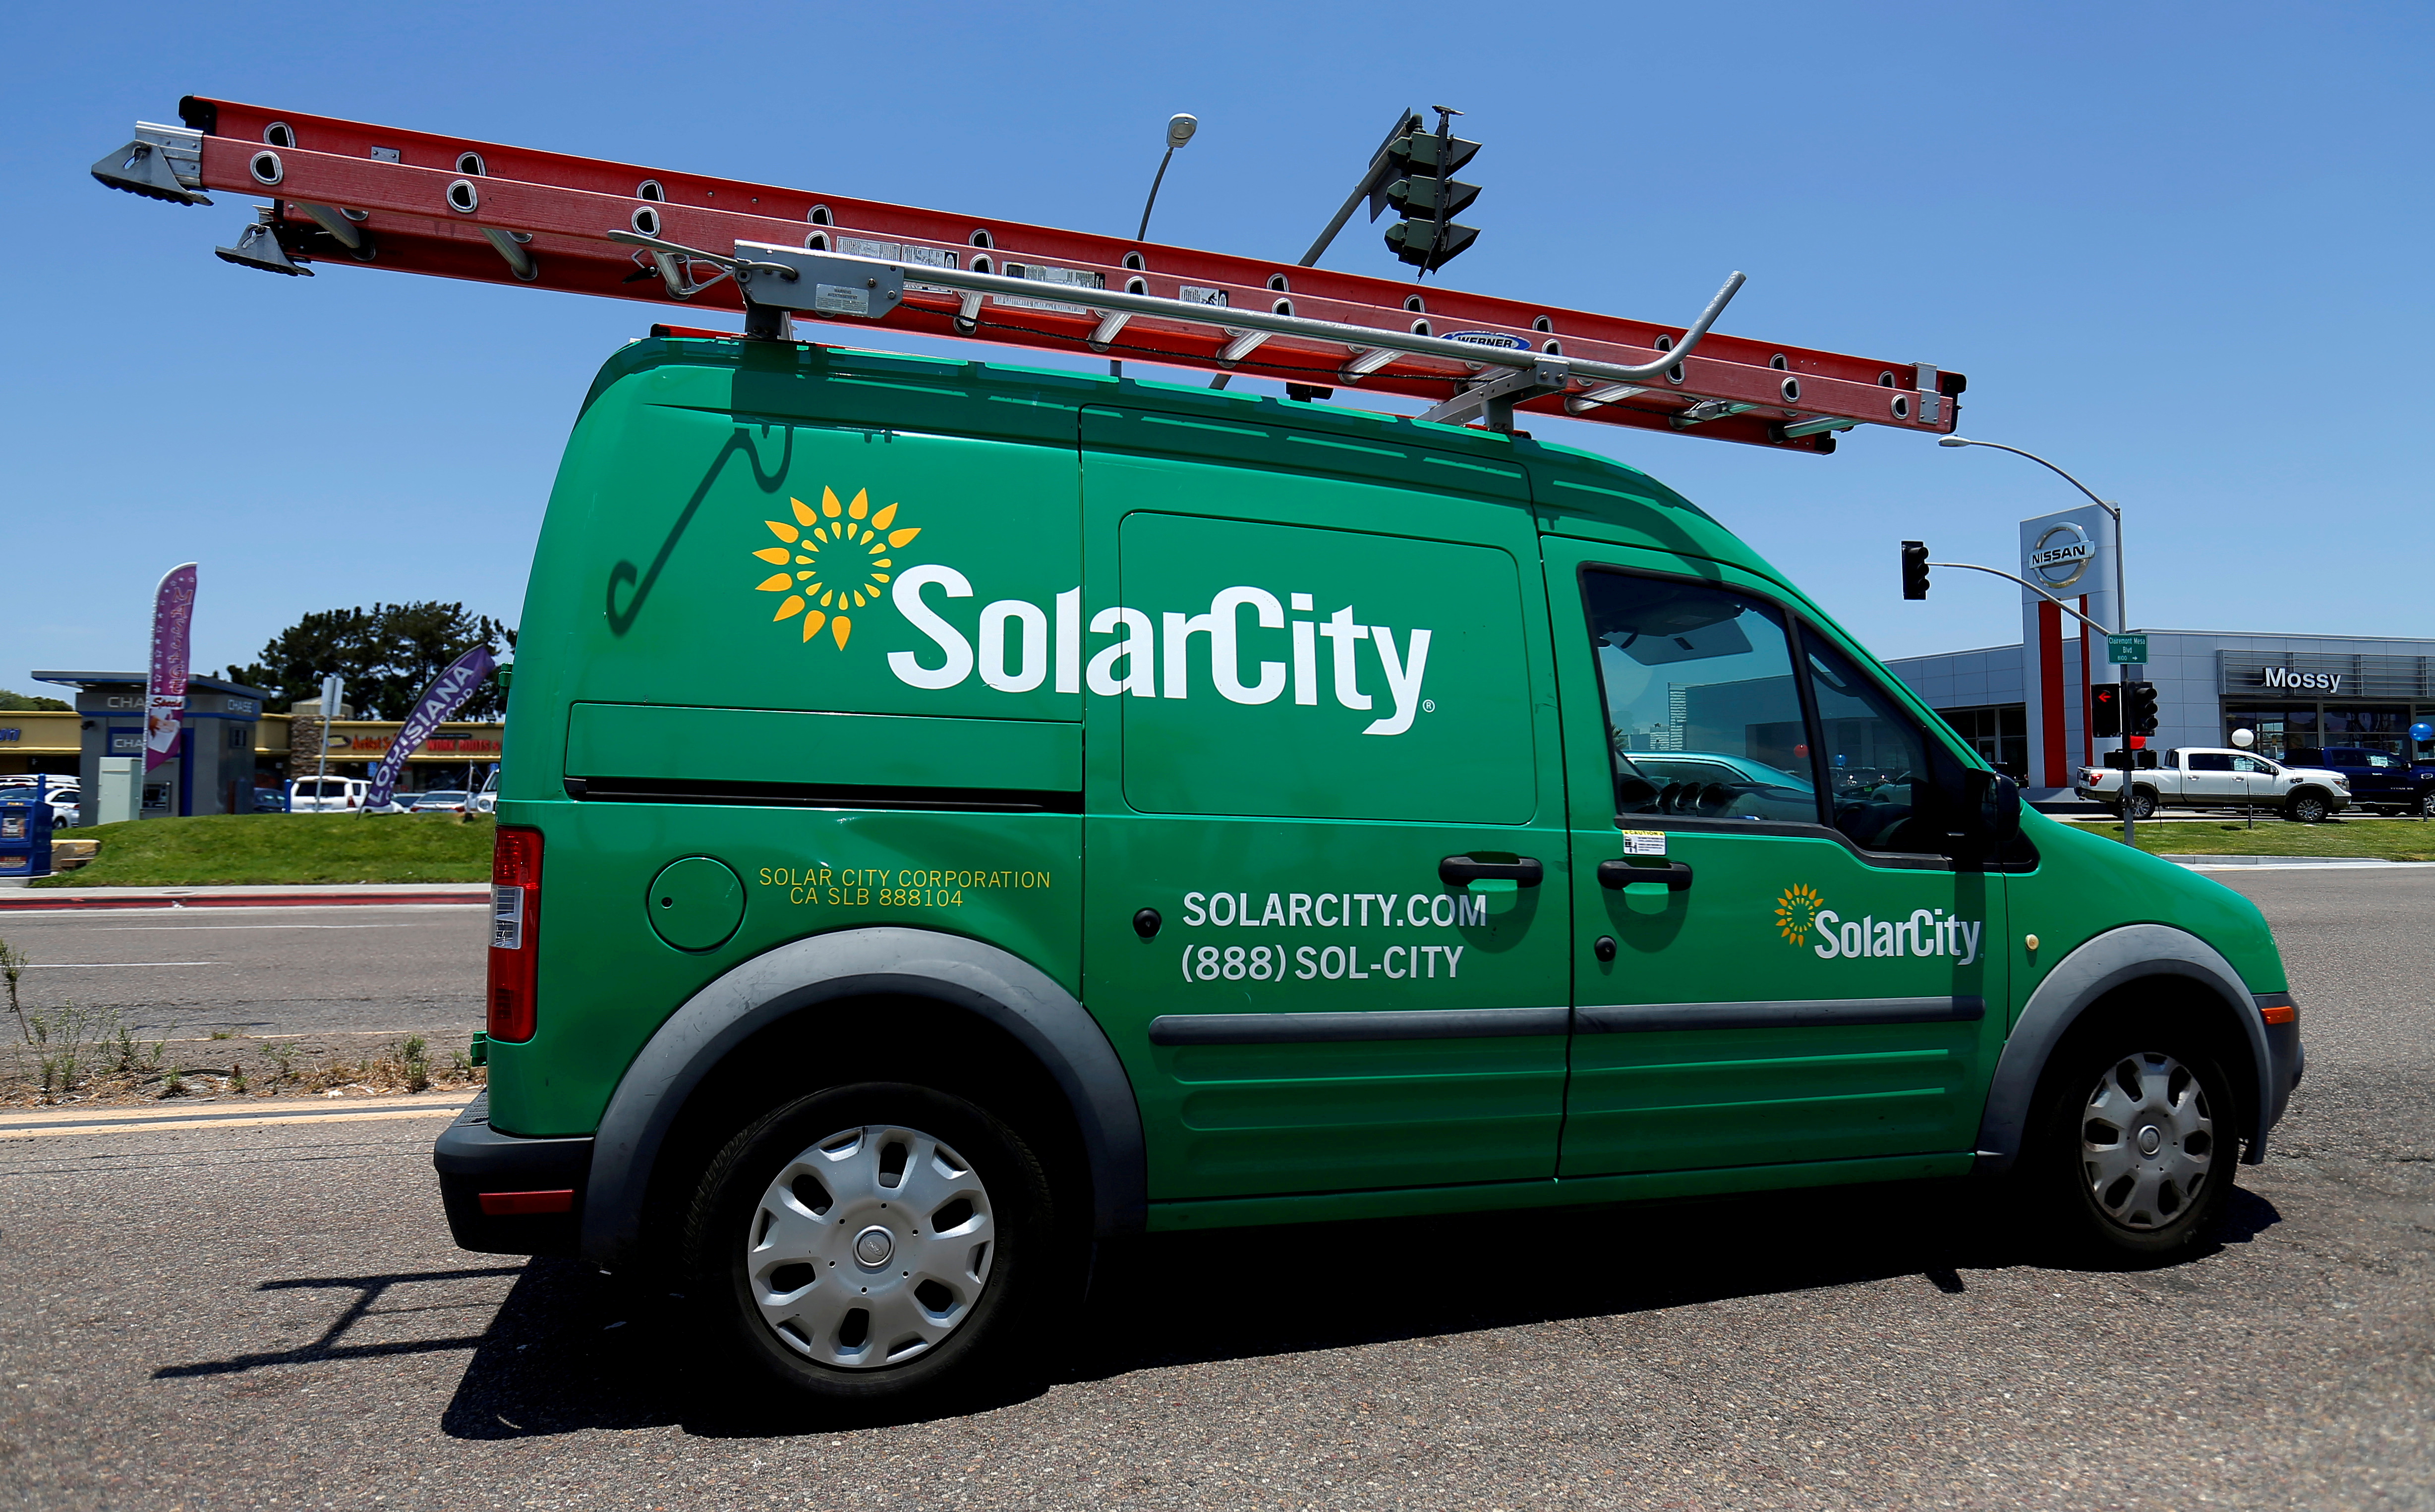 A SolarCity vehicle is seen on the road in San Diego, California